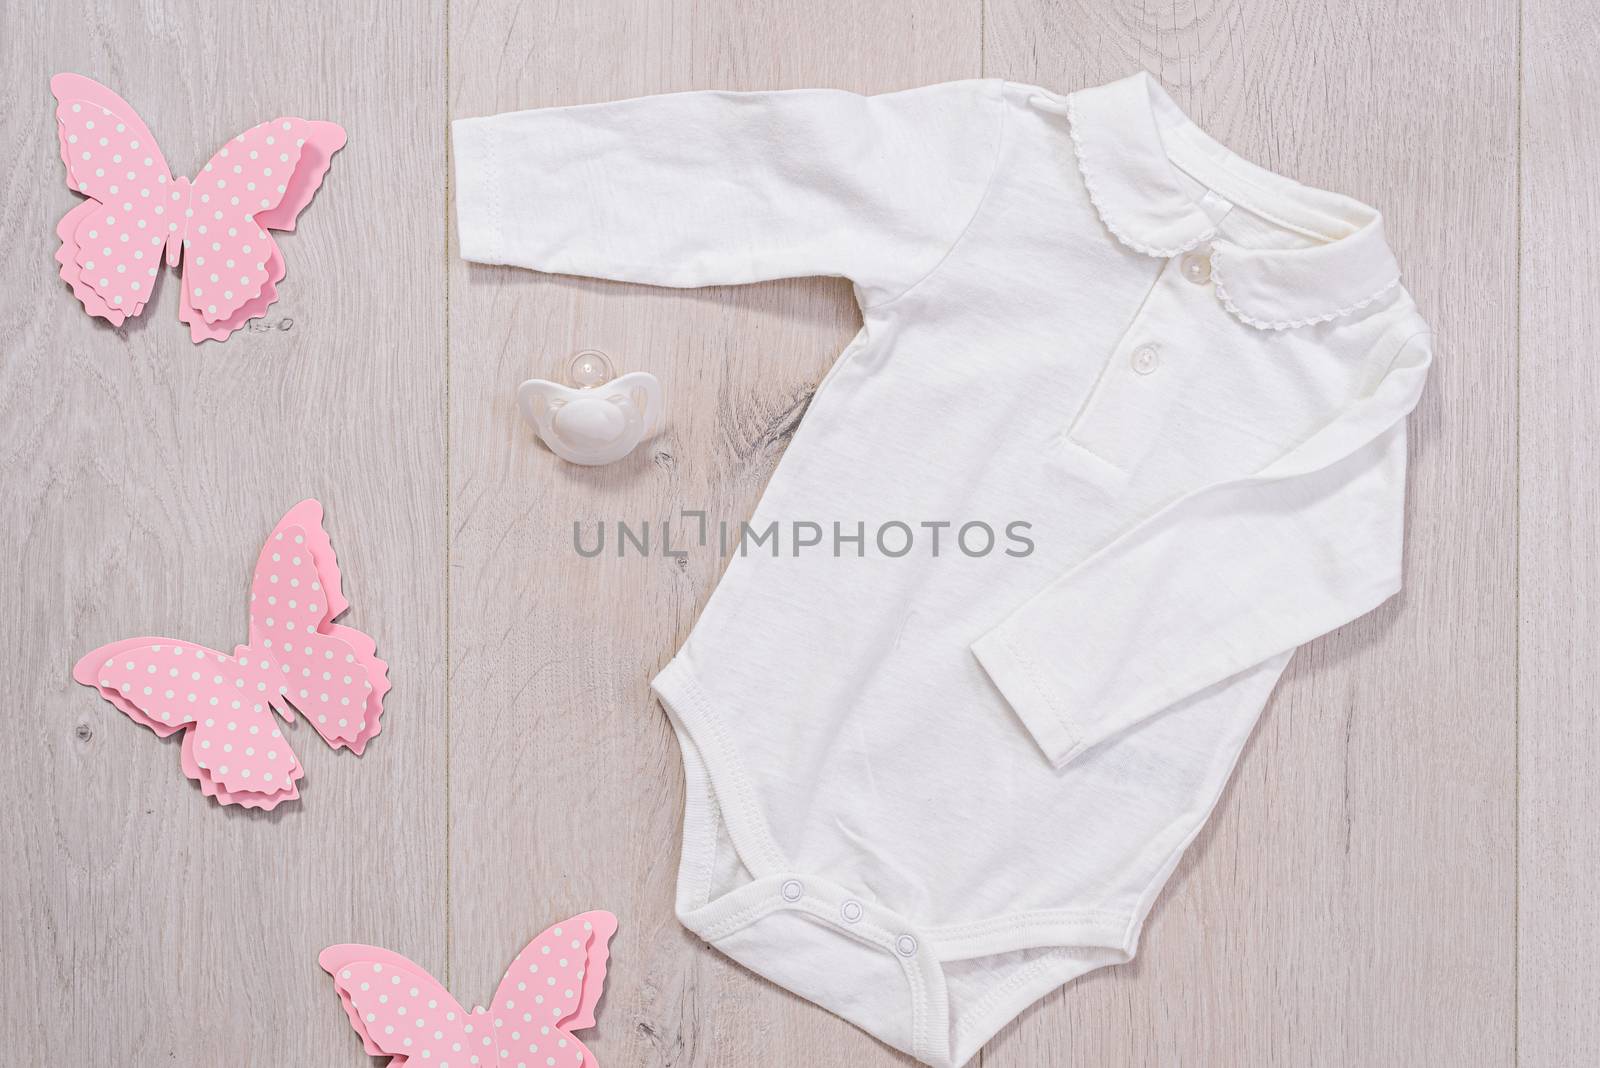 baby clothes concept. white outfit for girl on wooden background by jcdiazhidalgo